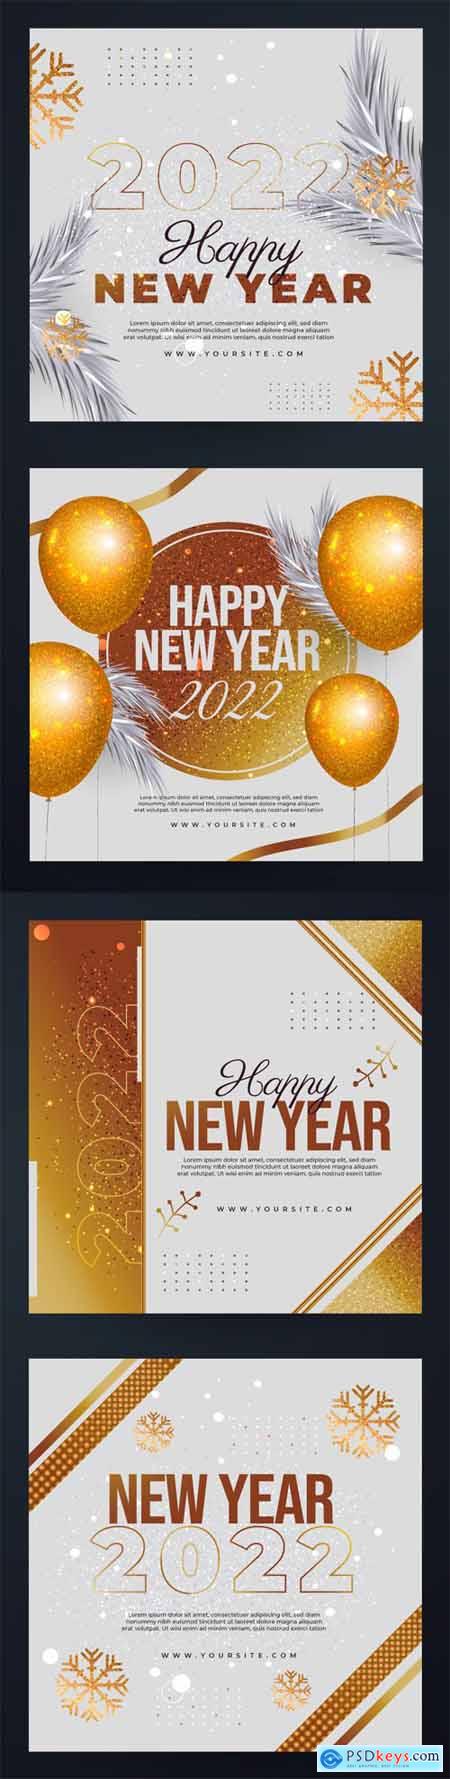 5 New Year 2022 Instagram Posts Vector Collection